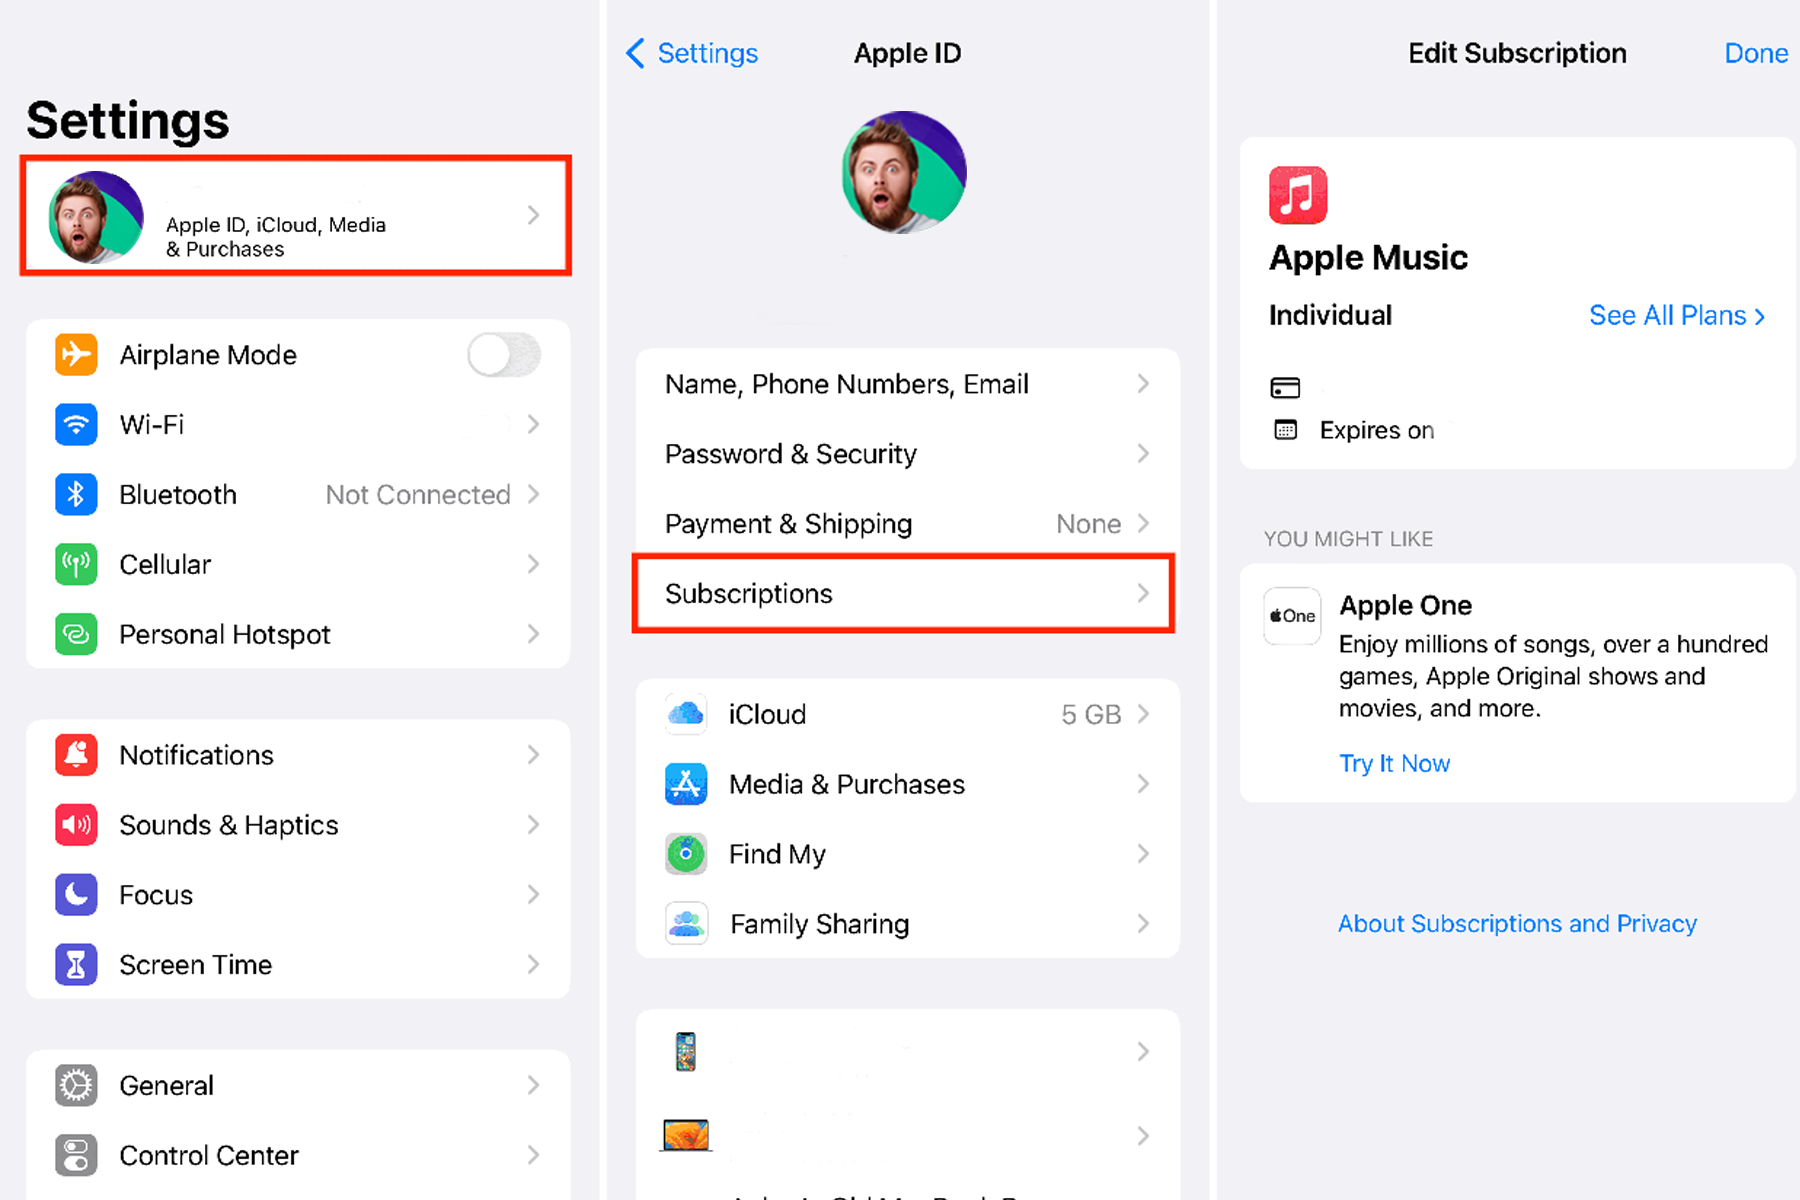 manage subscriptions on iOS